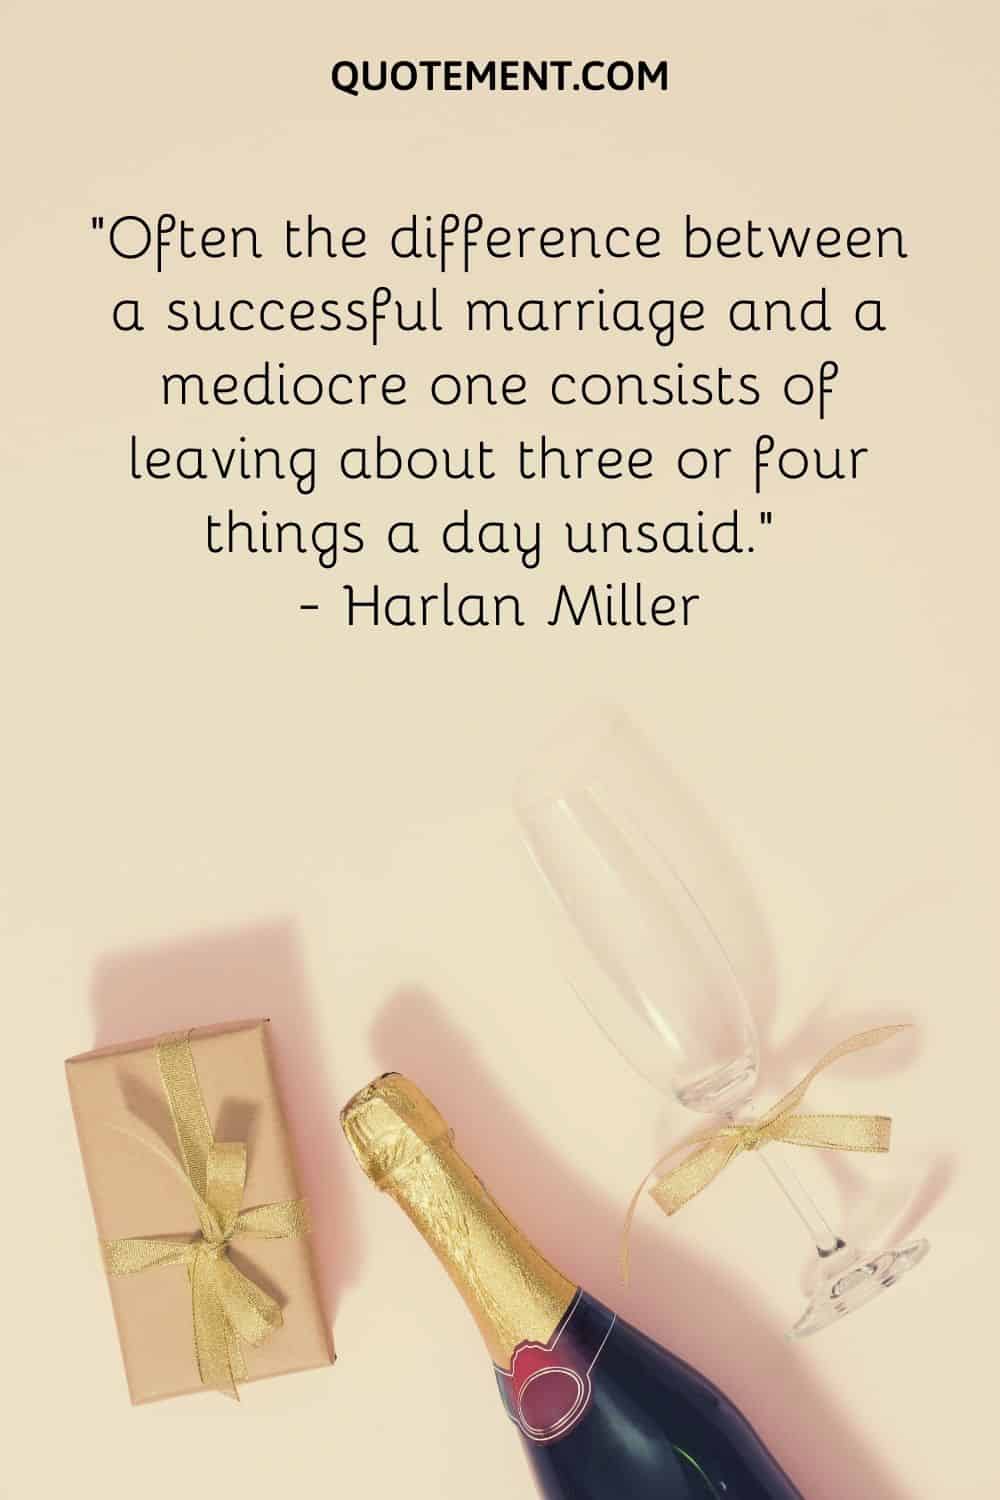 Often the difference between a successful marriage and a mediocre one consists of leaving about three or four things a day unsaid